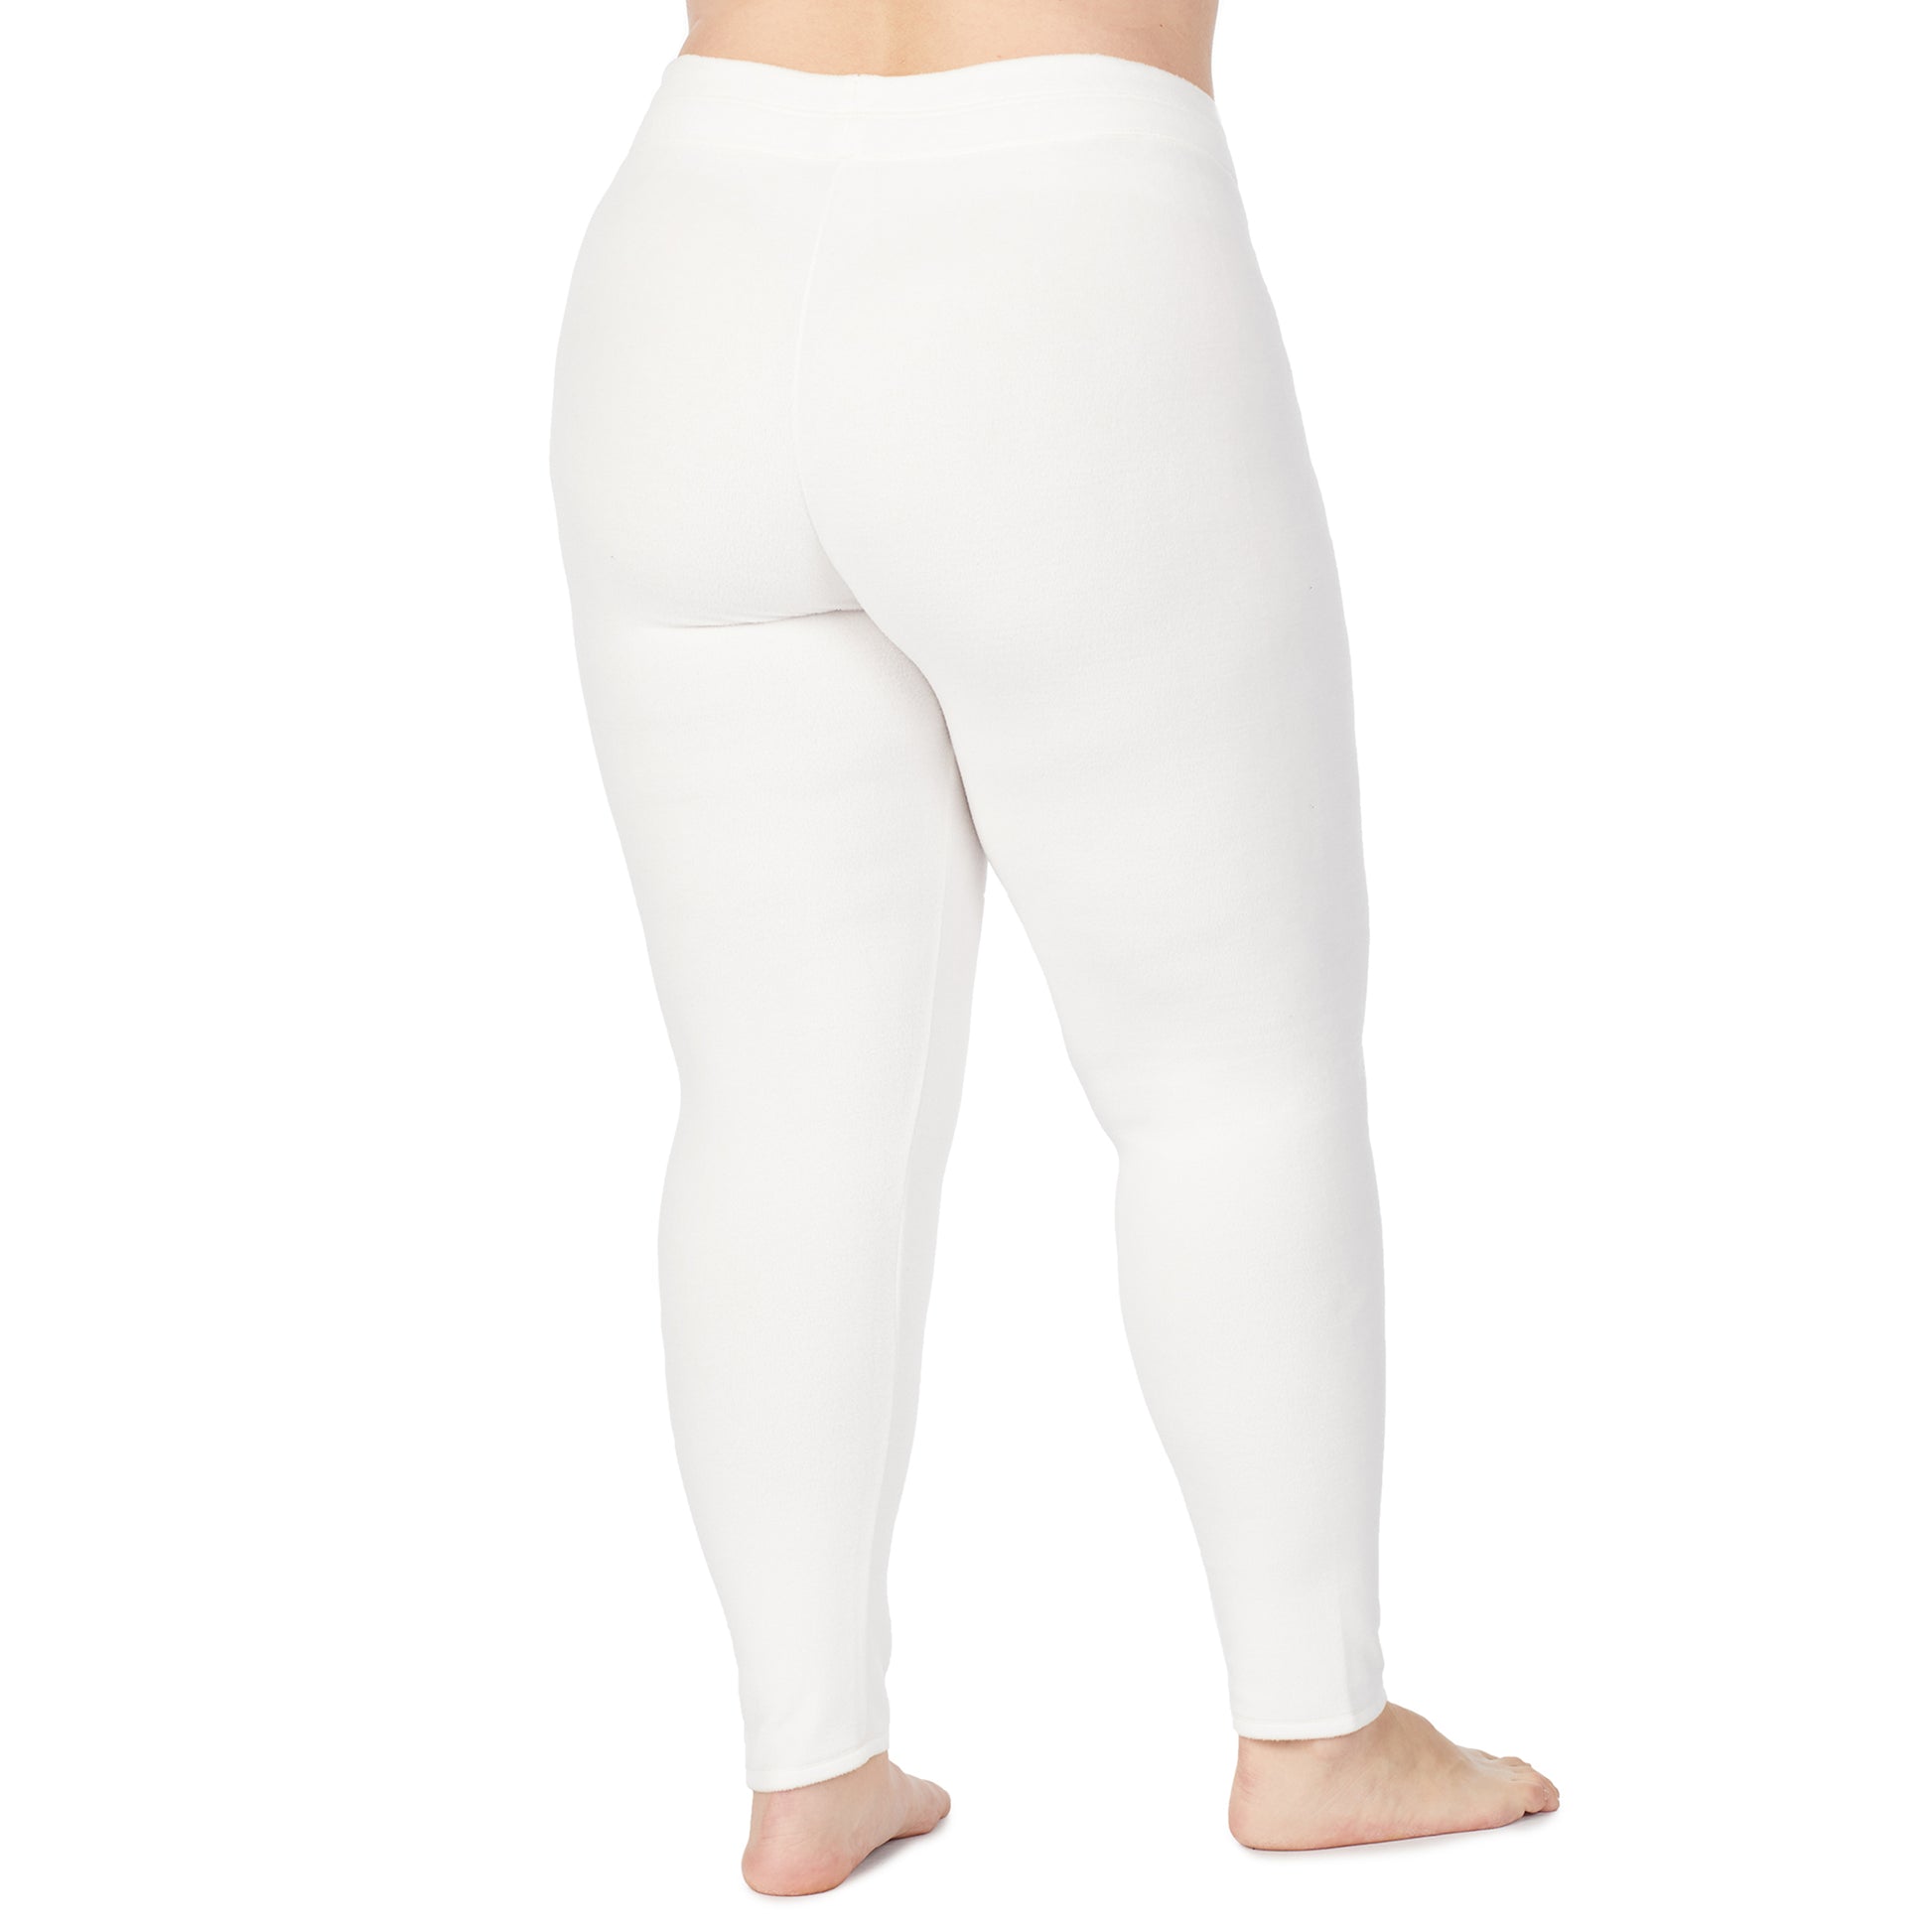 Off White; Model is wearing size 1X. She is 5'9", Bust 38", Waist 36", Hips 48.5".@lower body of a lady wearing white legging